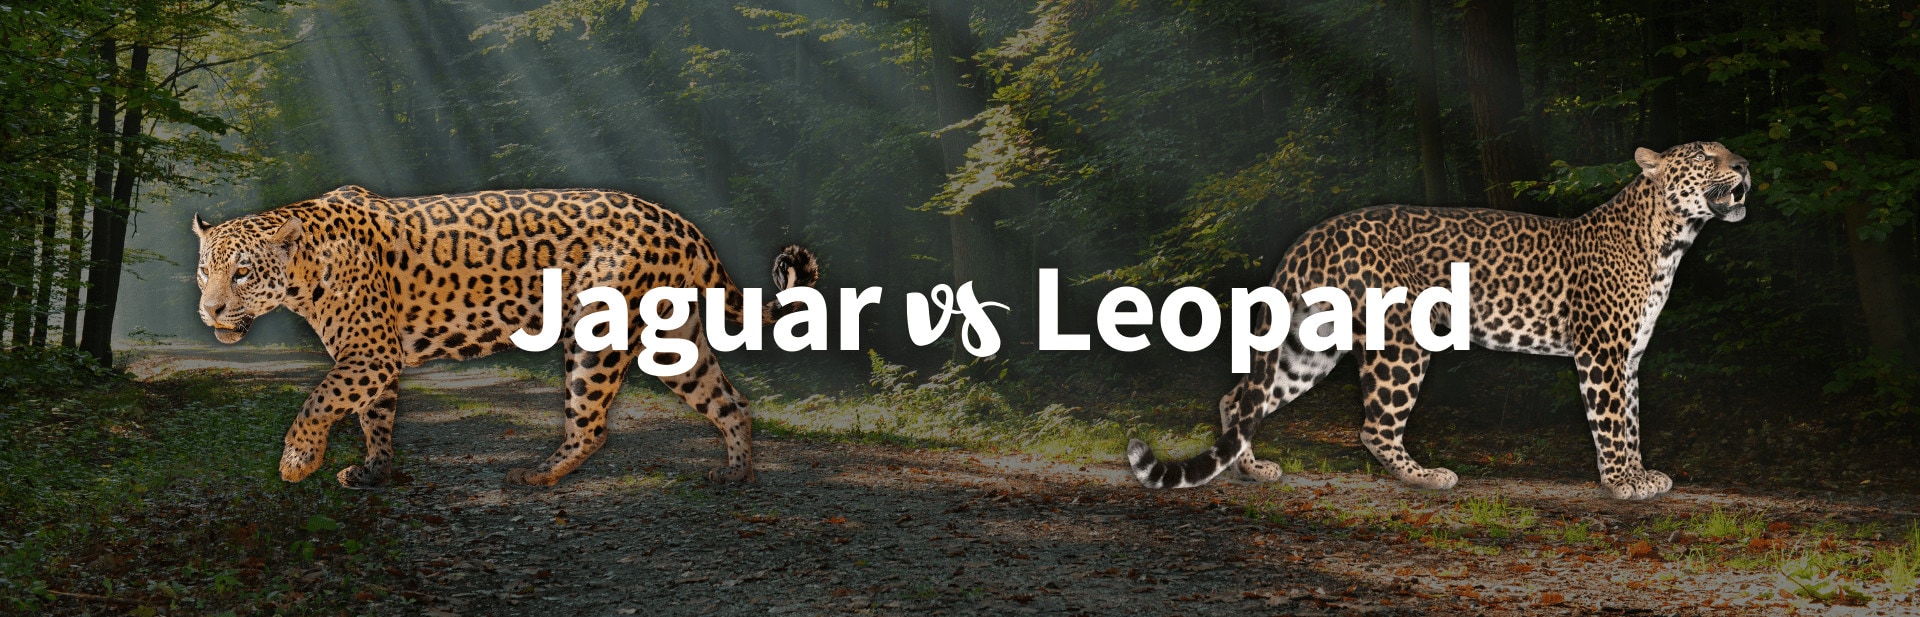 Jaguar vs Leopard: What’s The Difference Between These Big Cats?